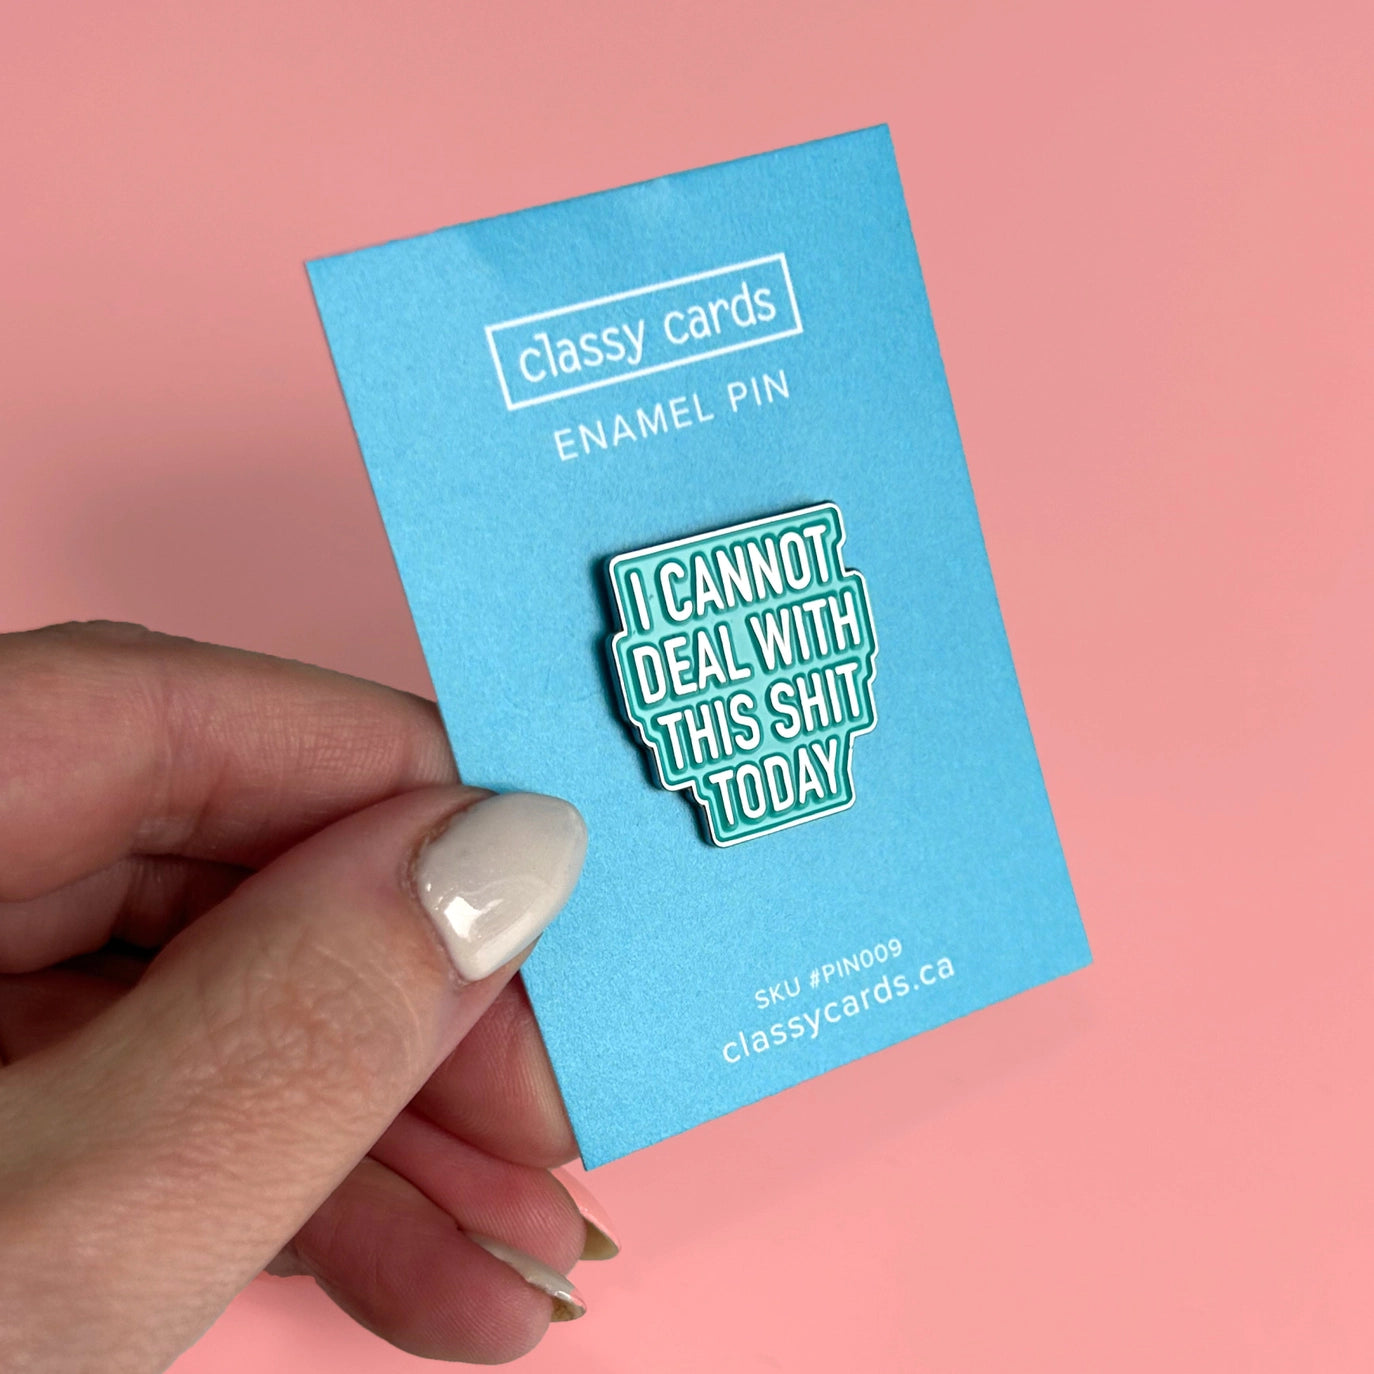 Classy Cards Enamel Pin - Deal With This Shit